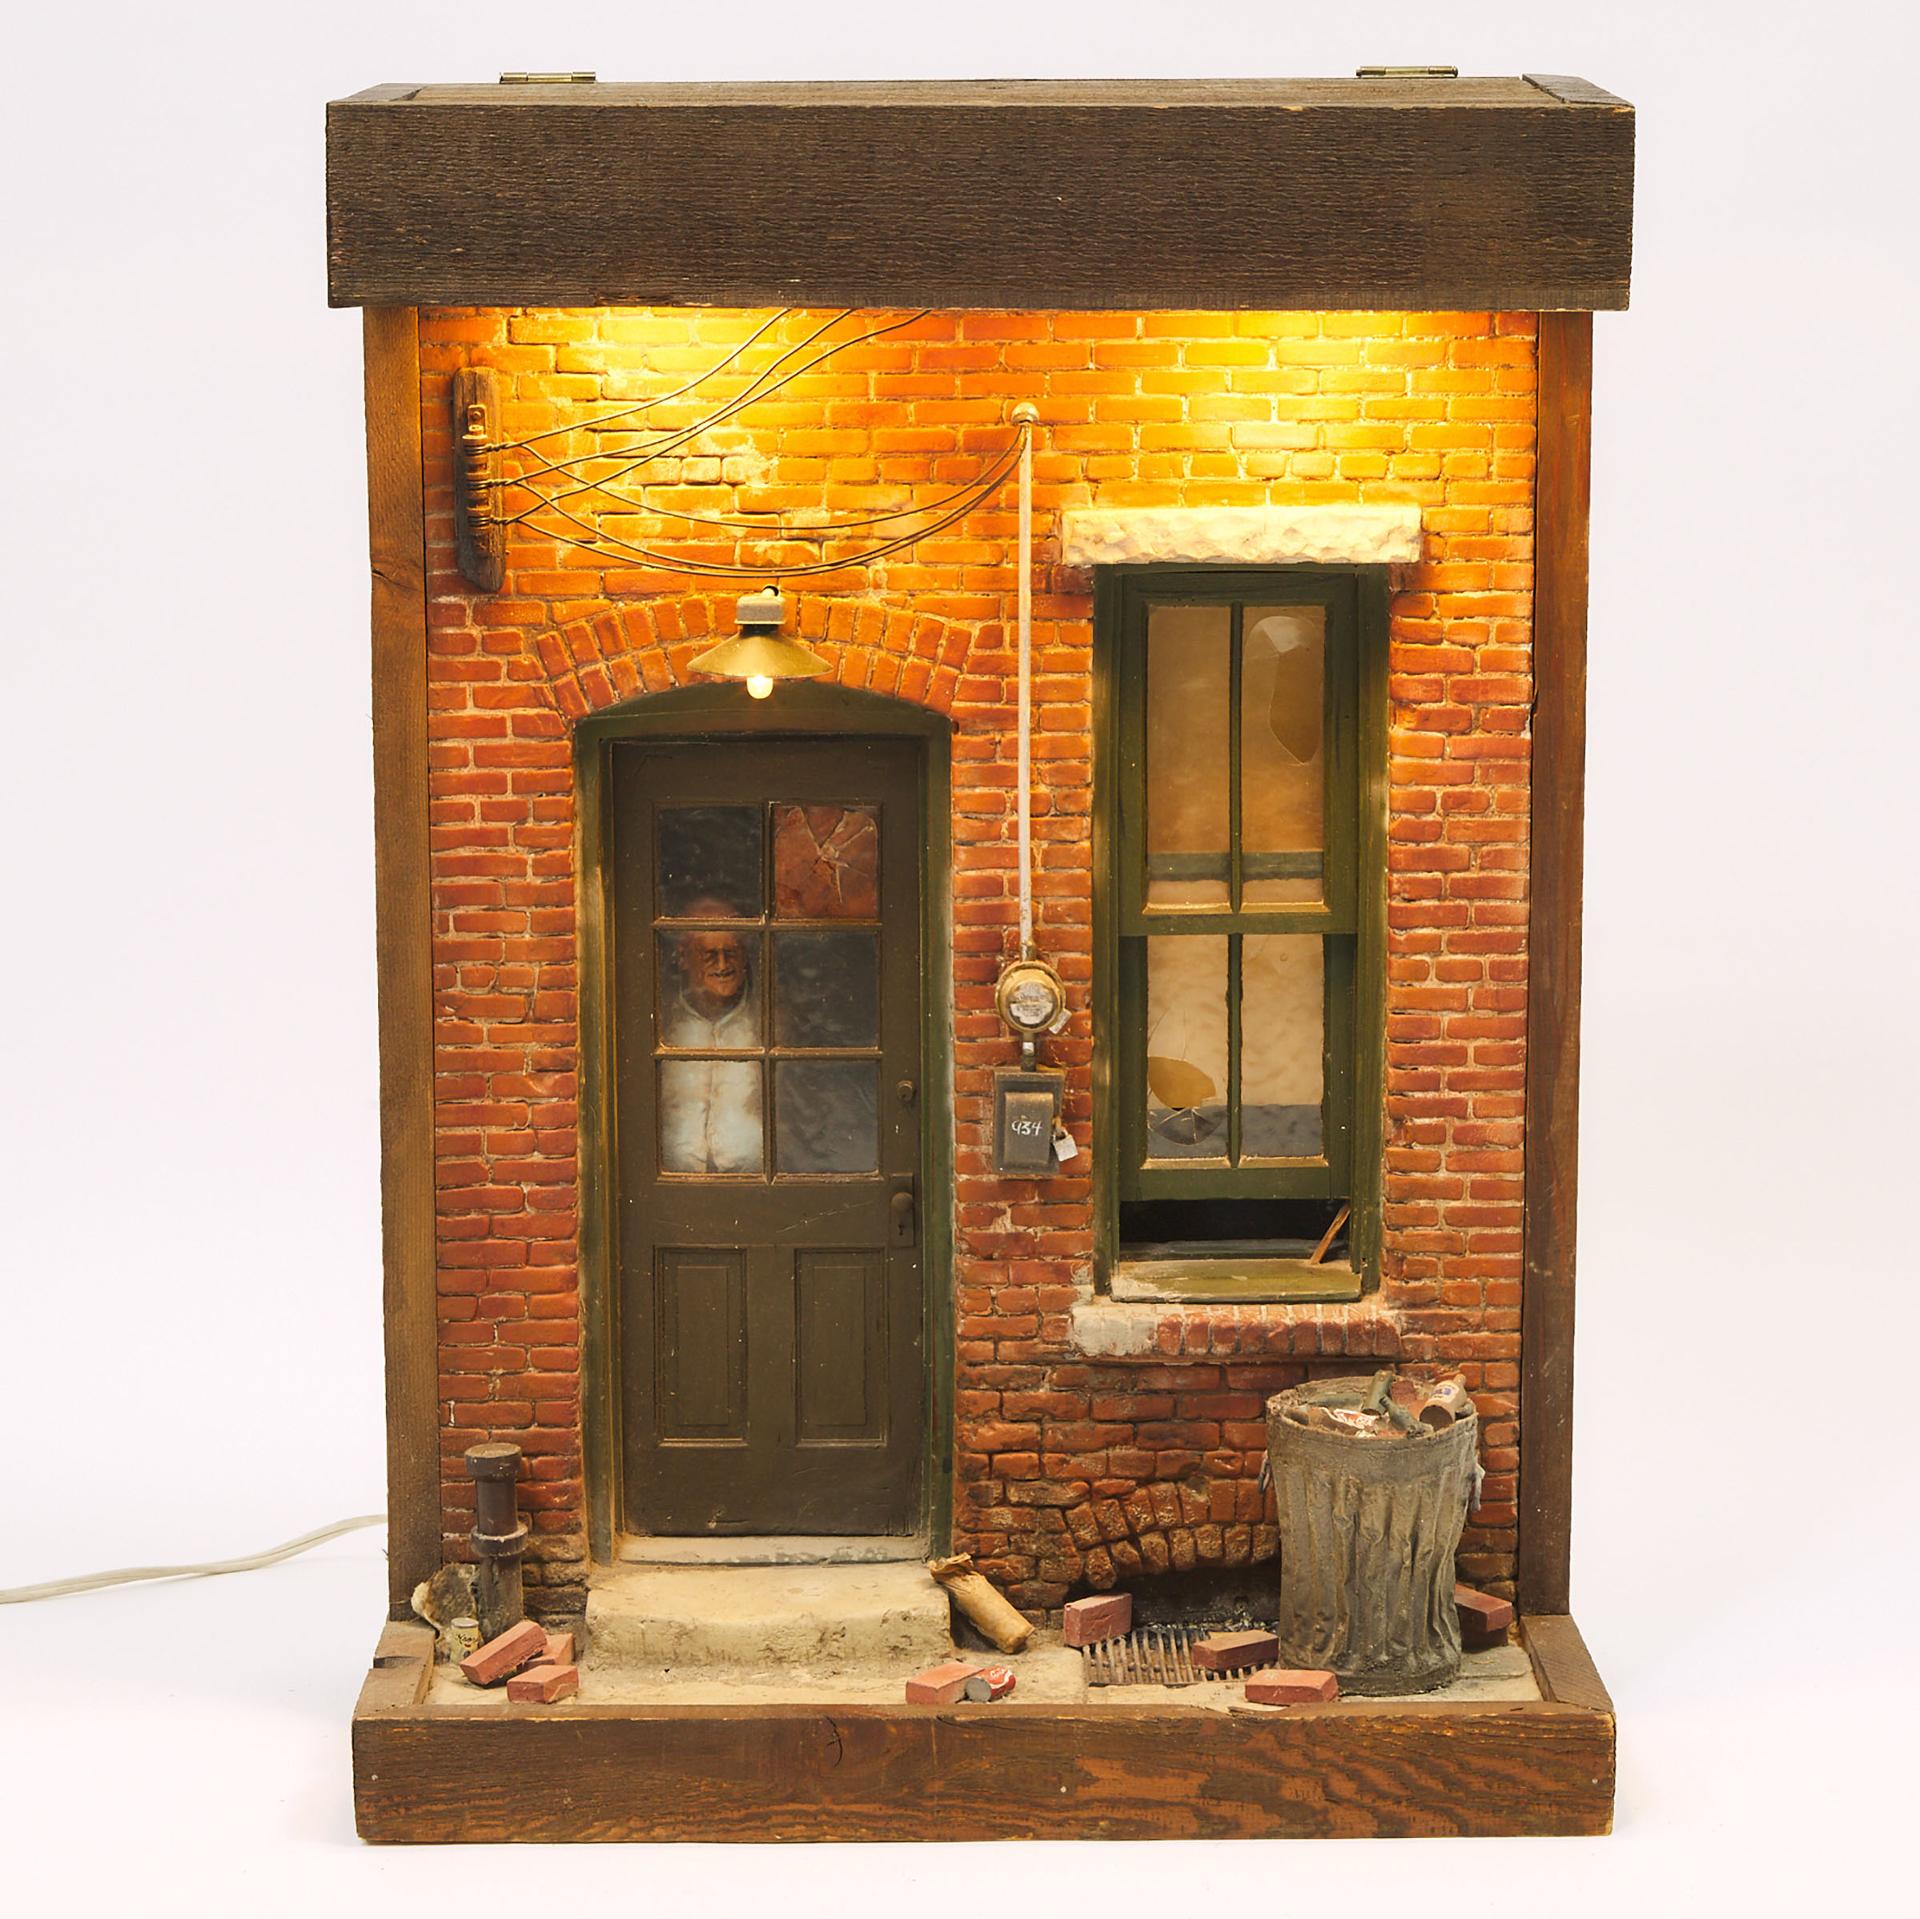 Michael Garman (1938) - Cityscape Diorama Of A Victorian Row House In Decay And Its Lone Occupant